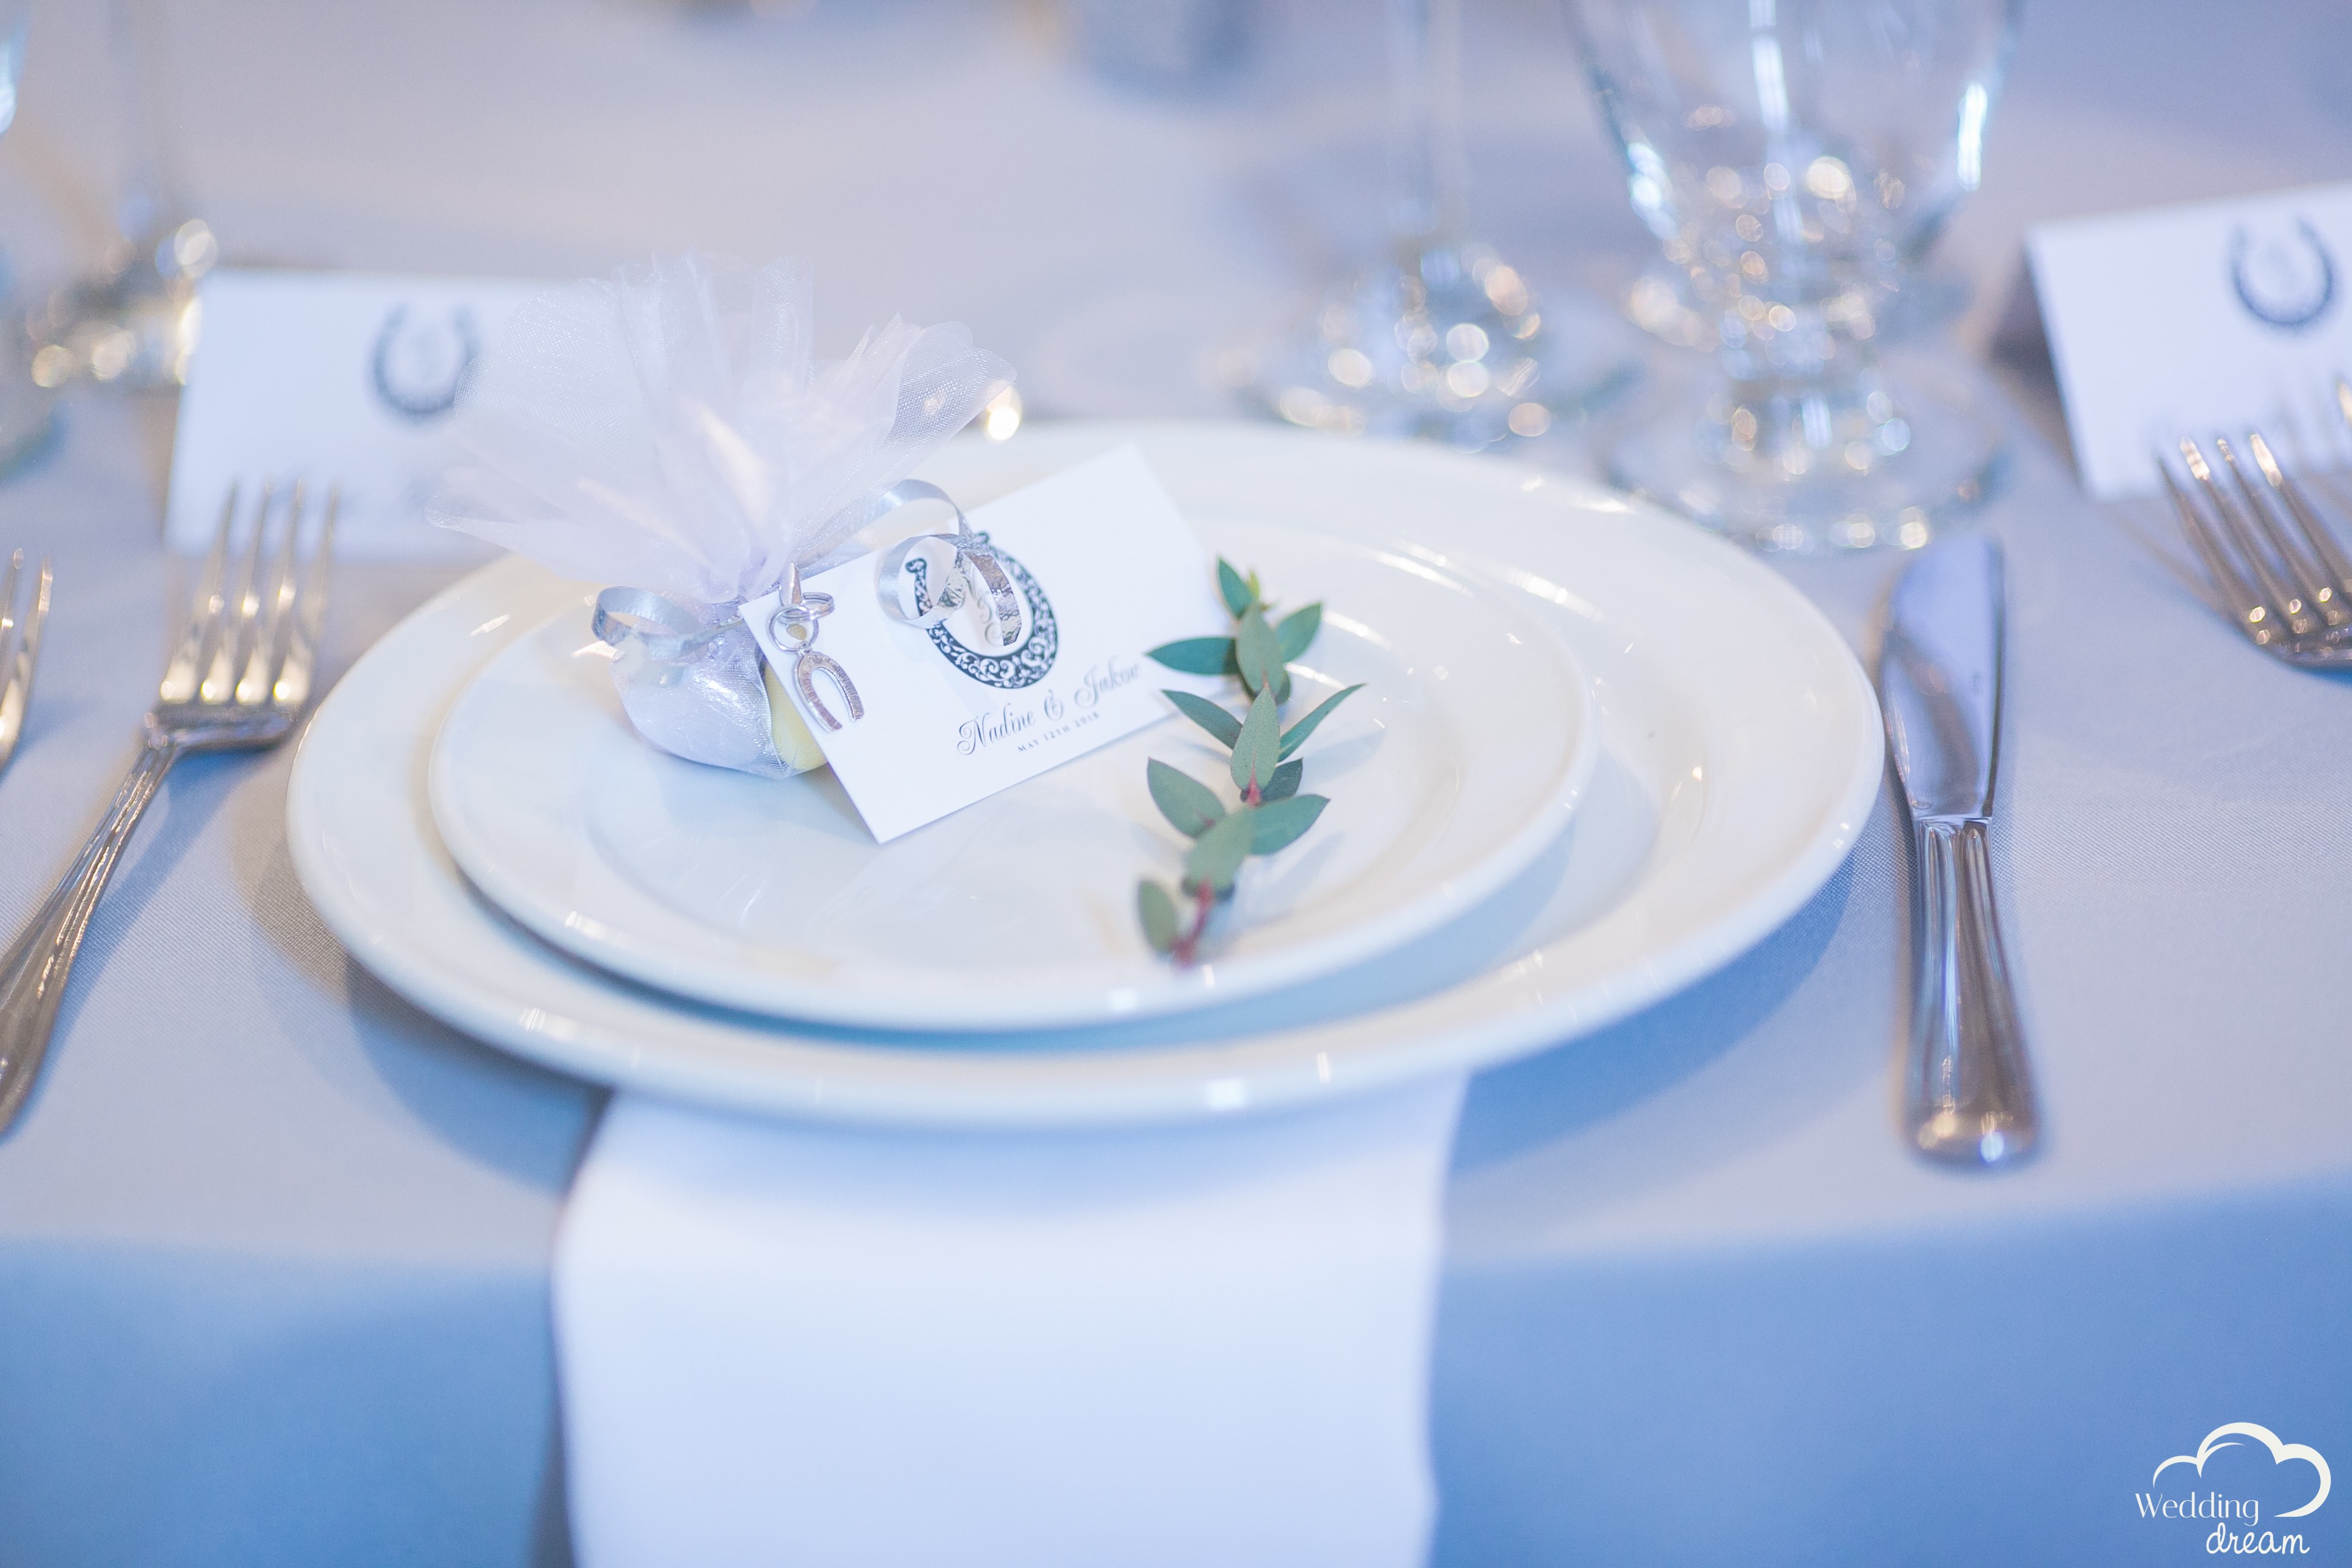 party favours kitchener waterloo wedding dream